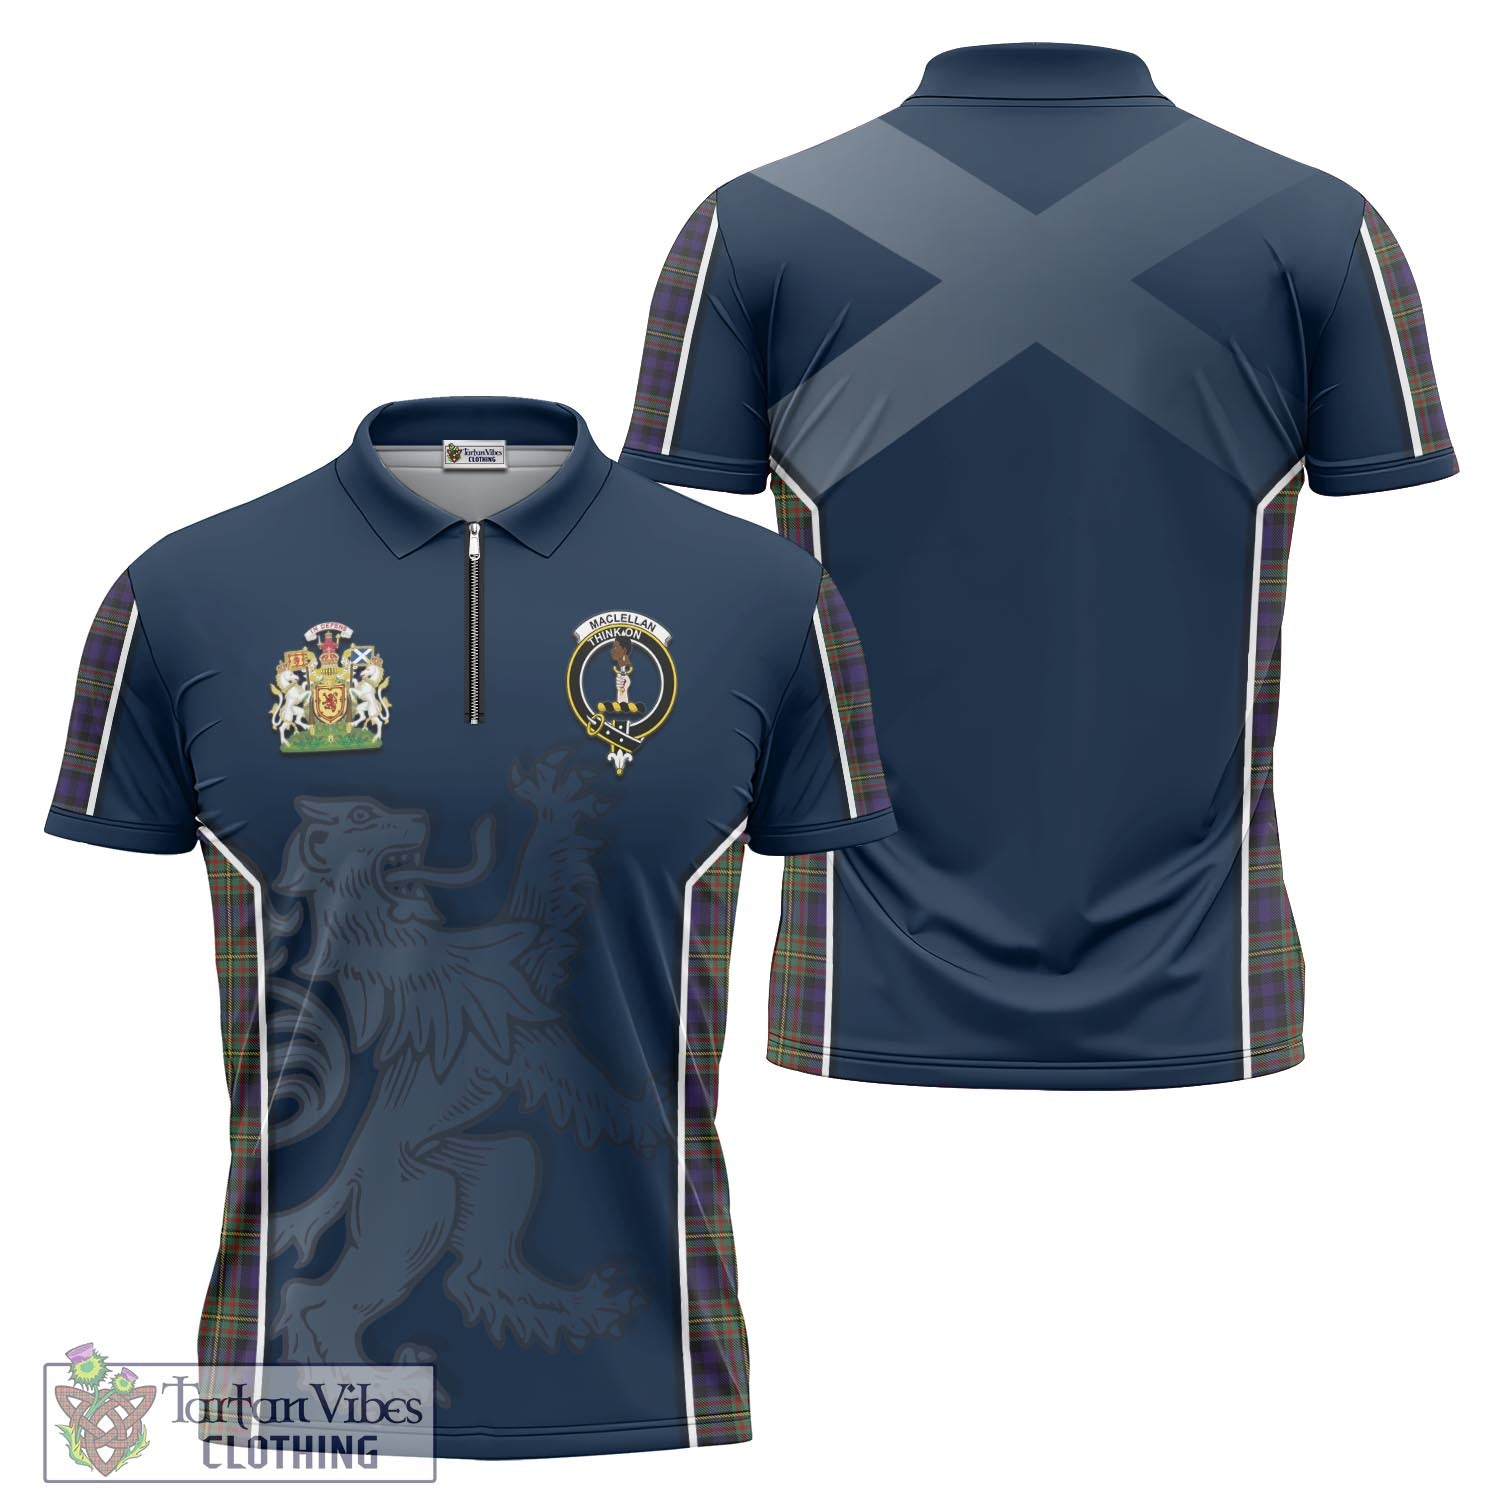 Tartan Vibes Clothing MacLellan Tartan Zipper Polo Shirt with Family Crest and Lion Rampant Vibes Sport Style